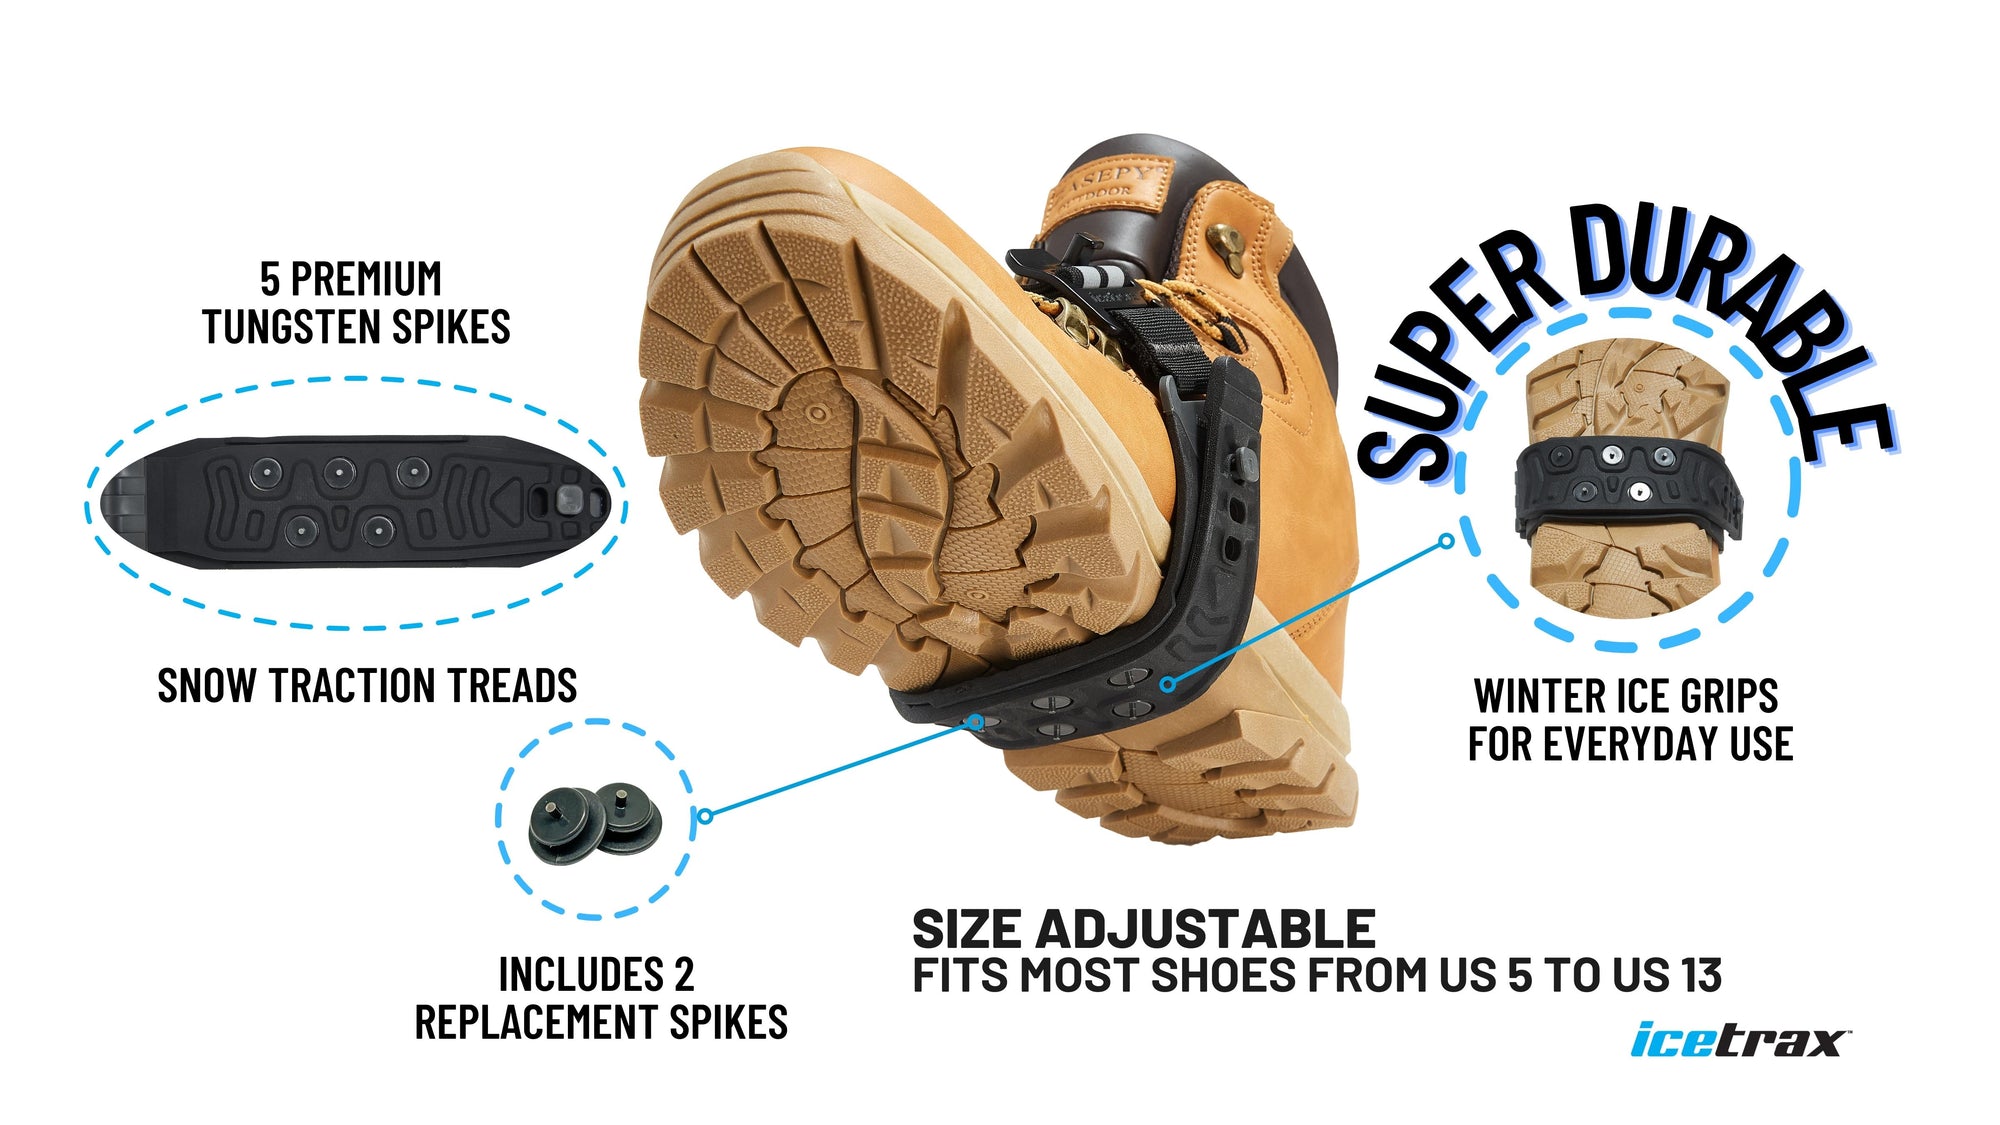 ICETRAX Pro HEX Grip Winter Ice Cleats for Shoes and Boots - Ice